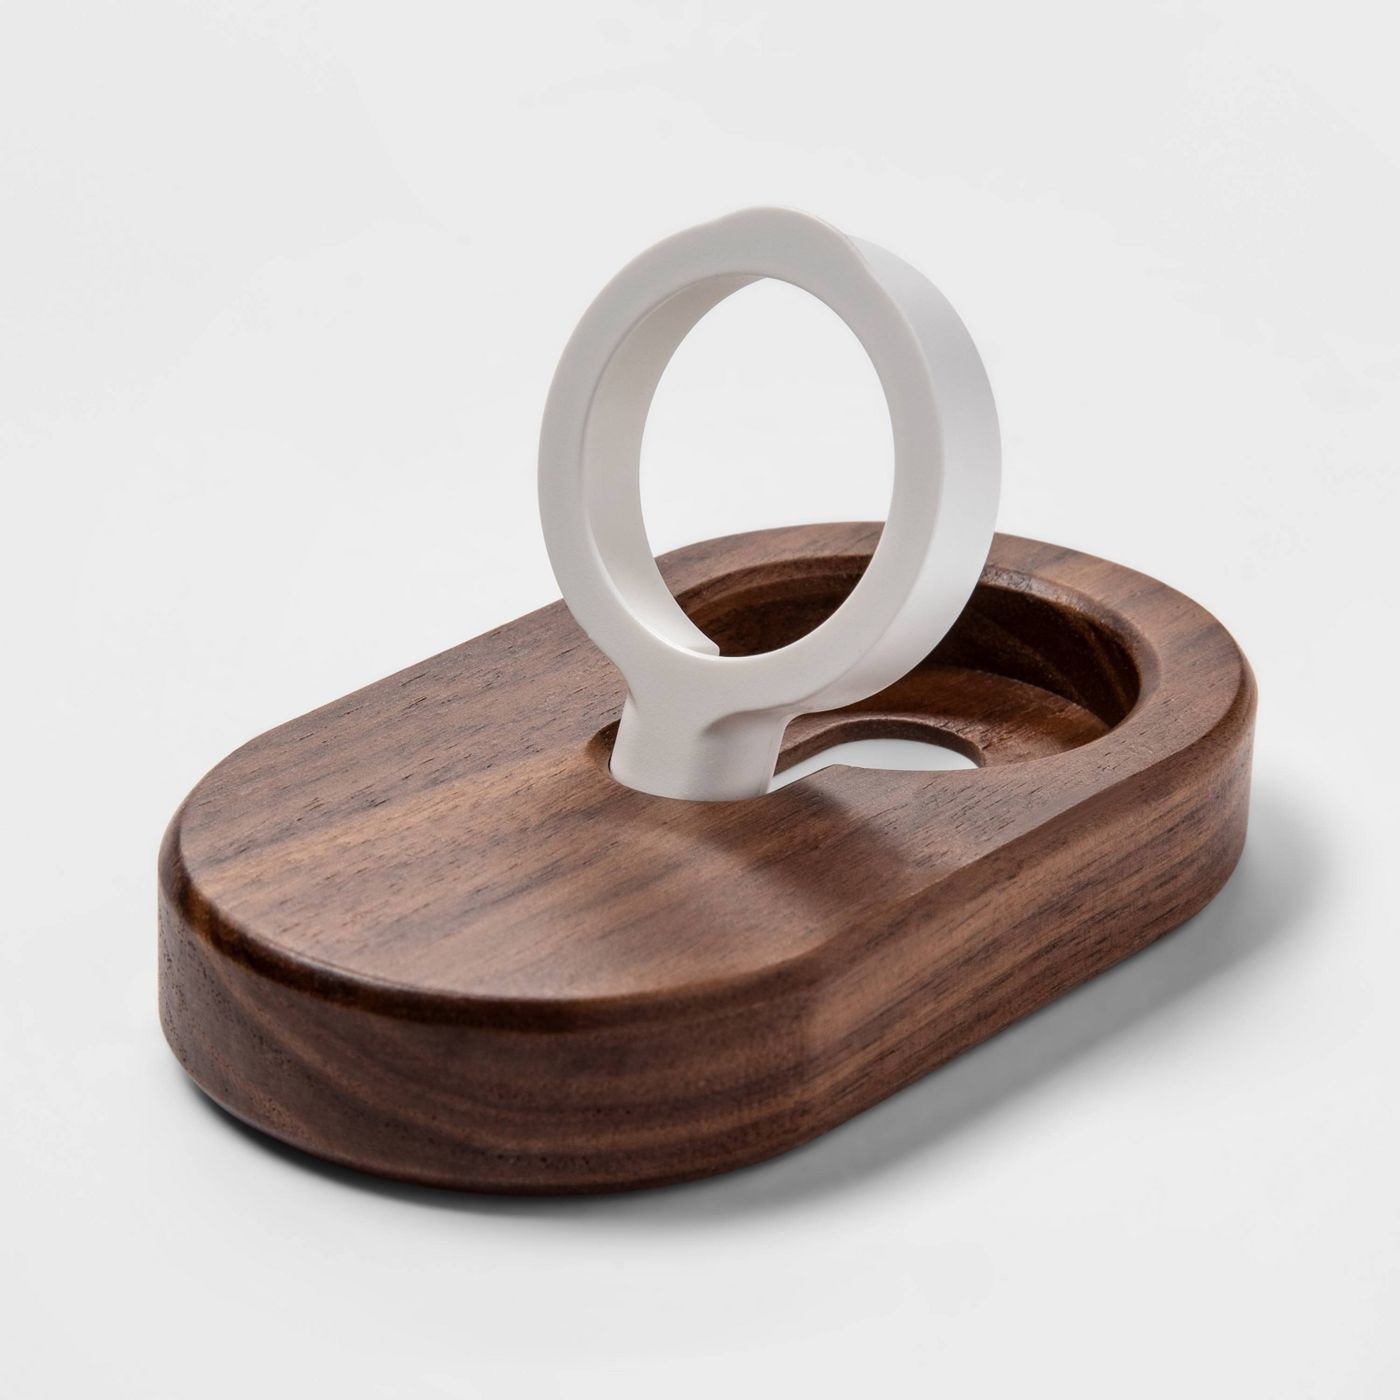 The stand, which has an oval wood base, and a round pop-out watch holder